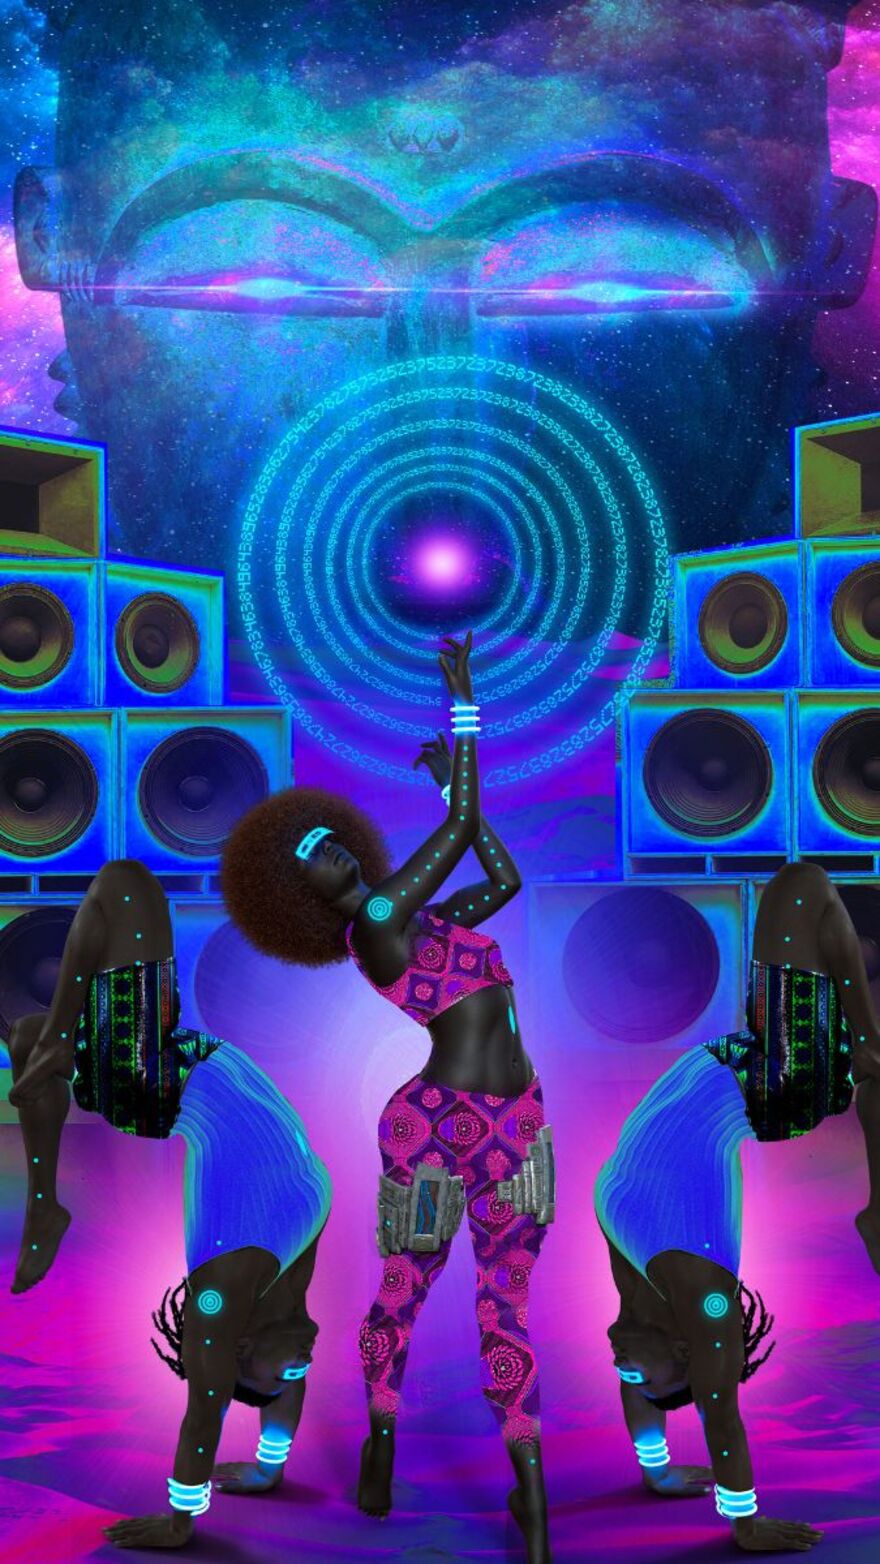 A digital drawing of the Afrinaughts. They wear highly patterned club clothing with LED inspired lighting. Behind them are speaker systems and a stone like face